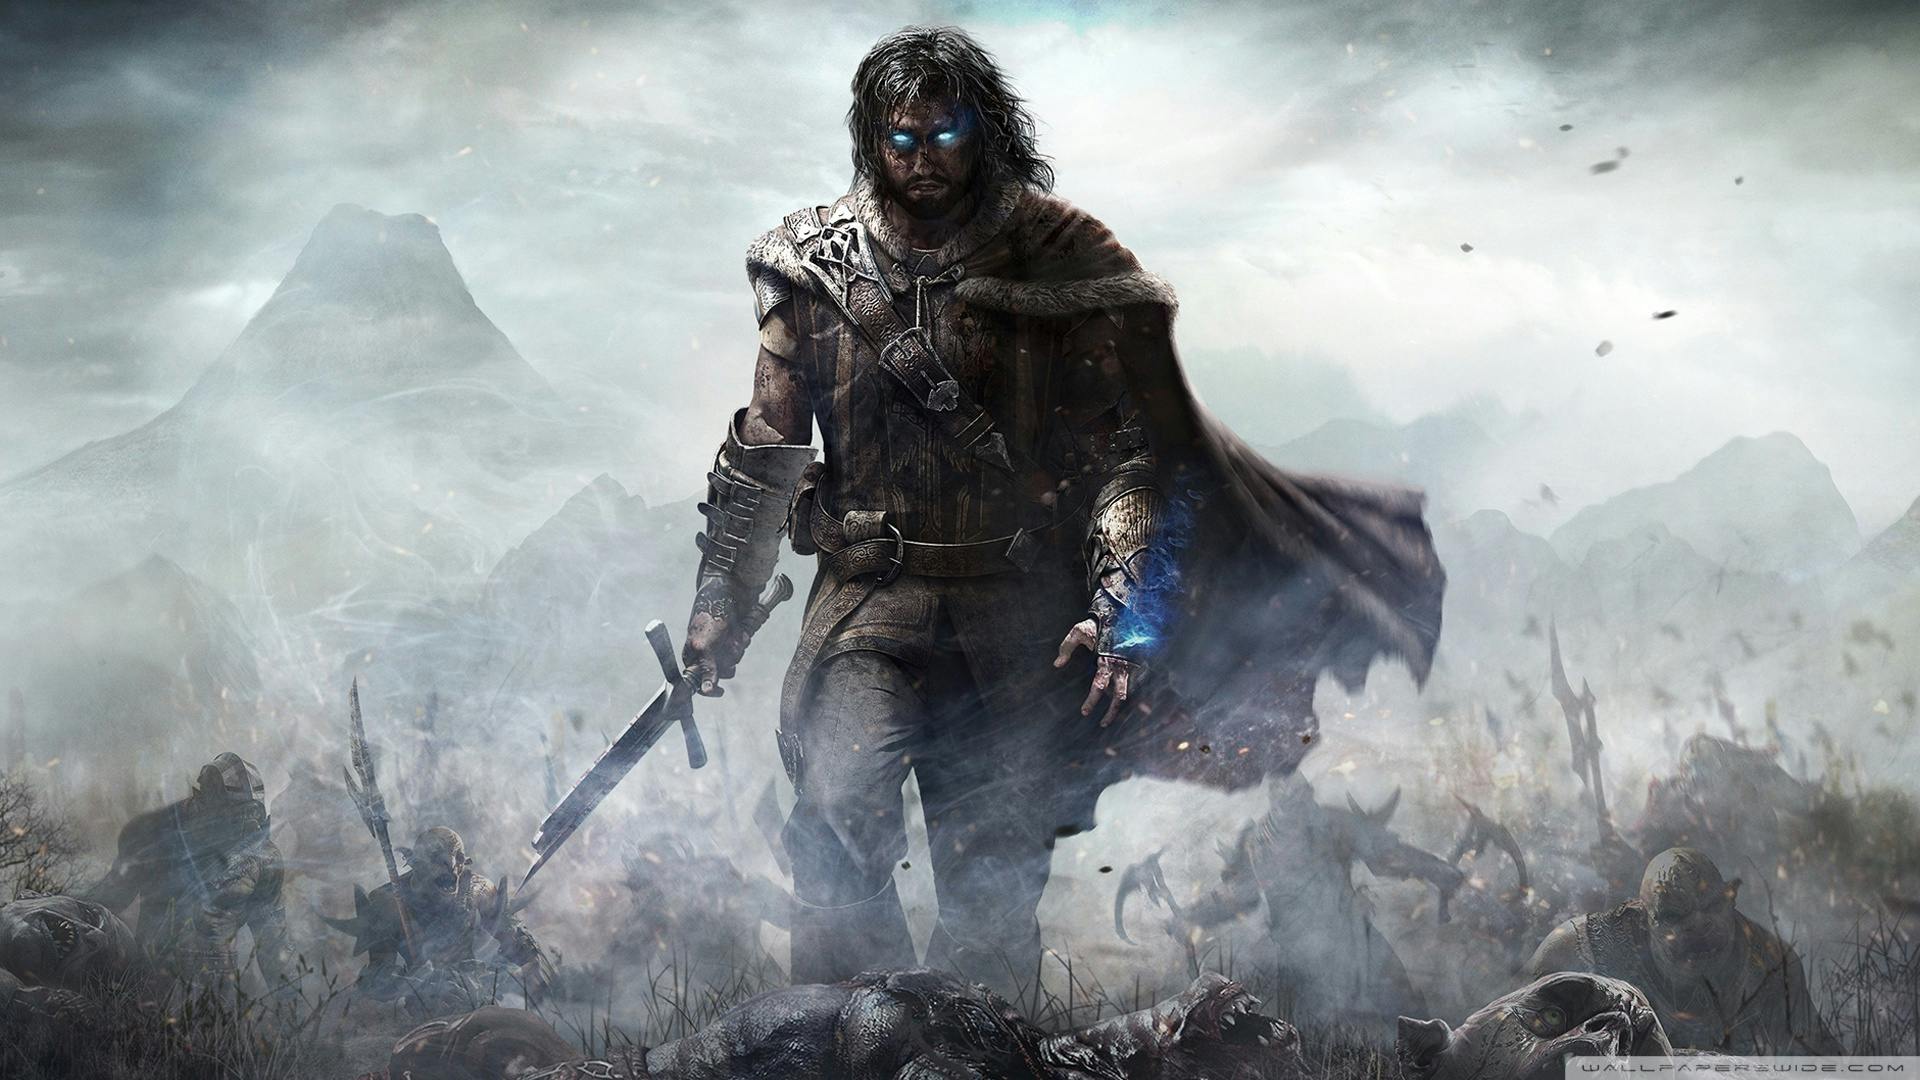 Game - Middle-earth: Shadow of Mordor